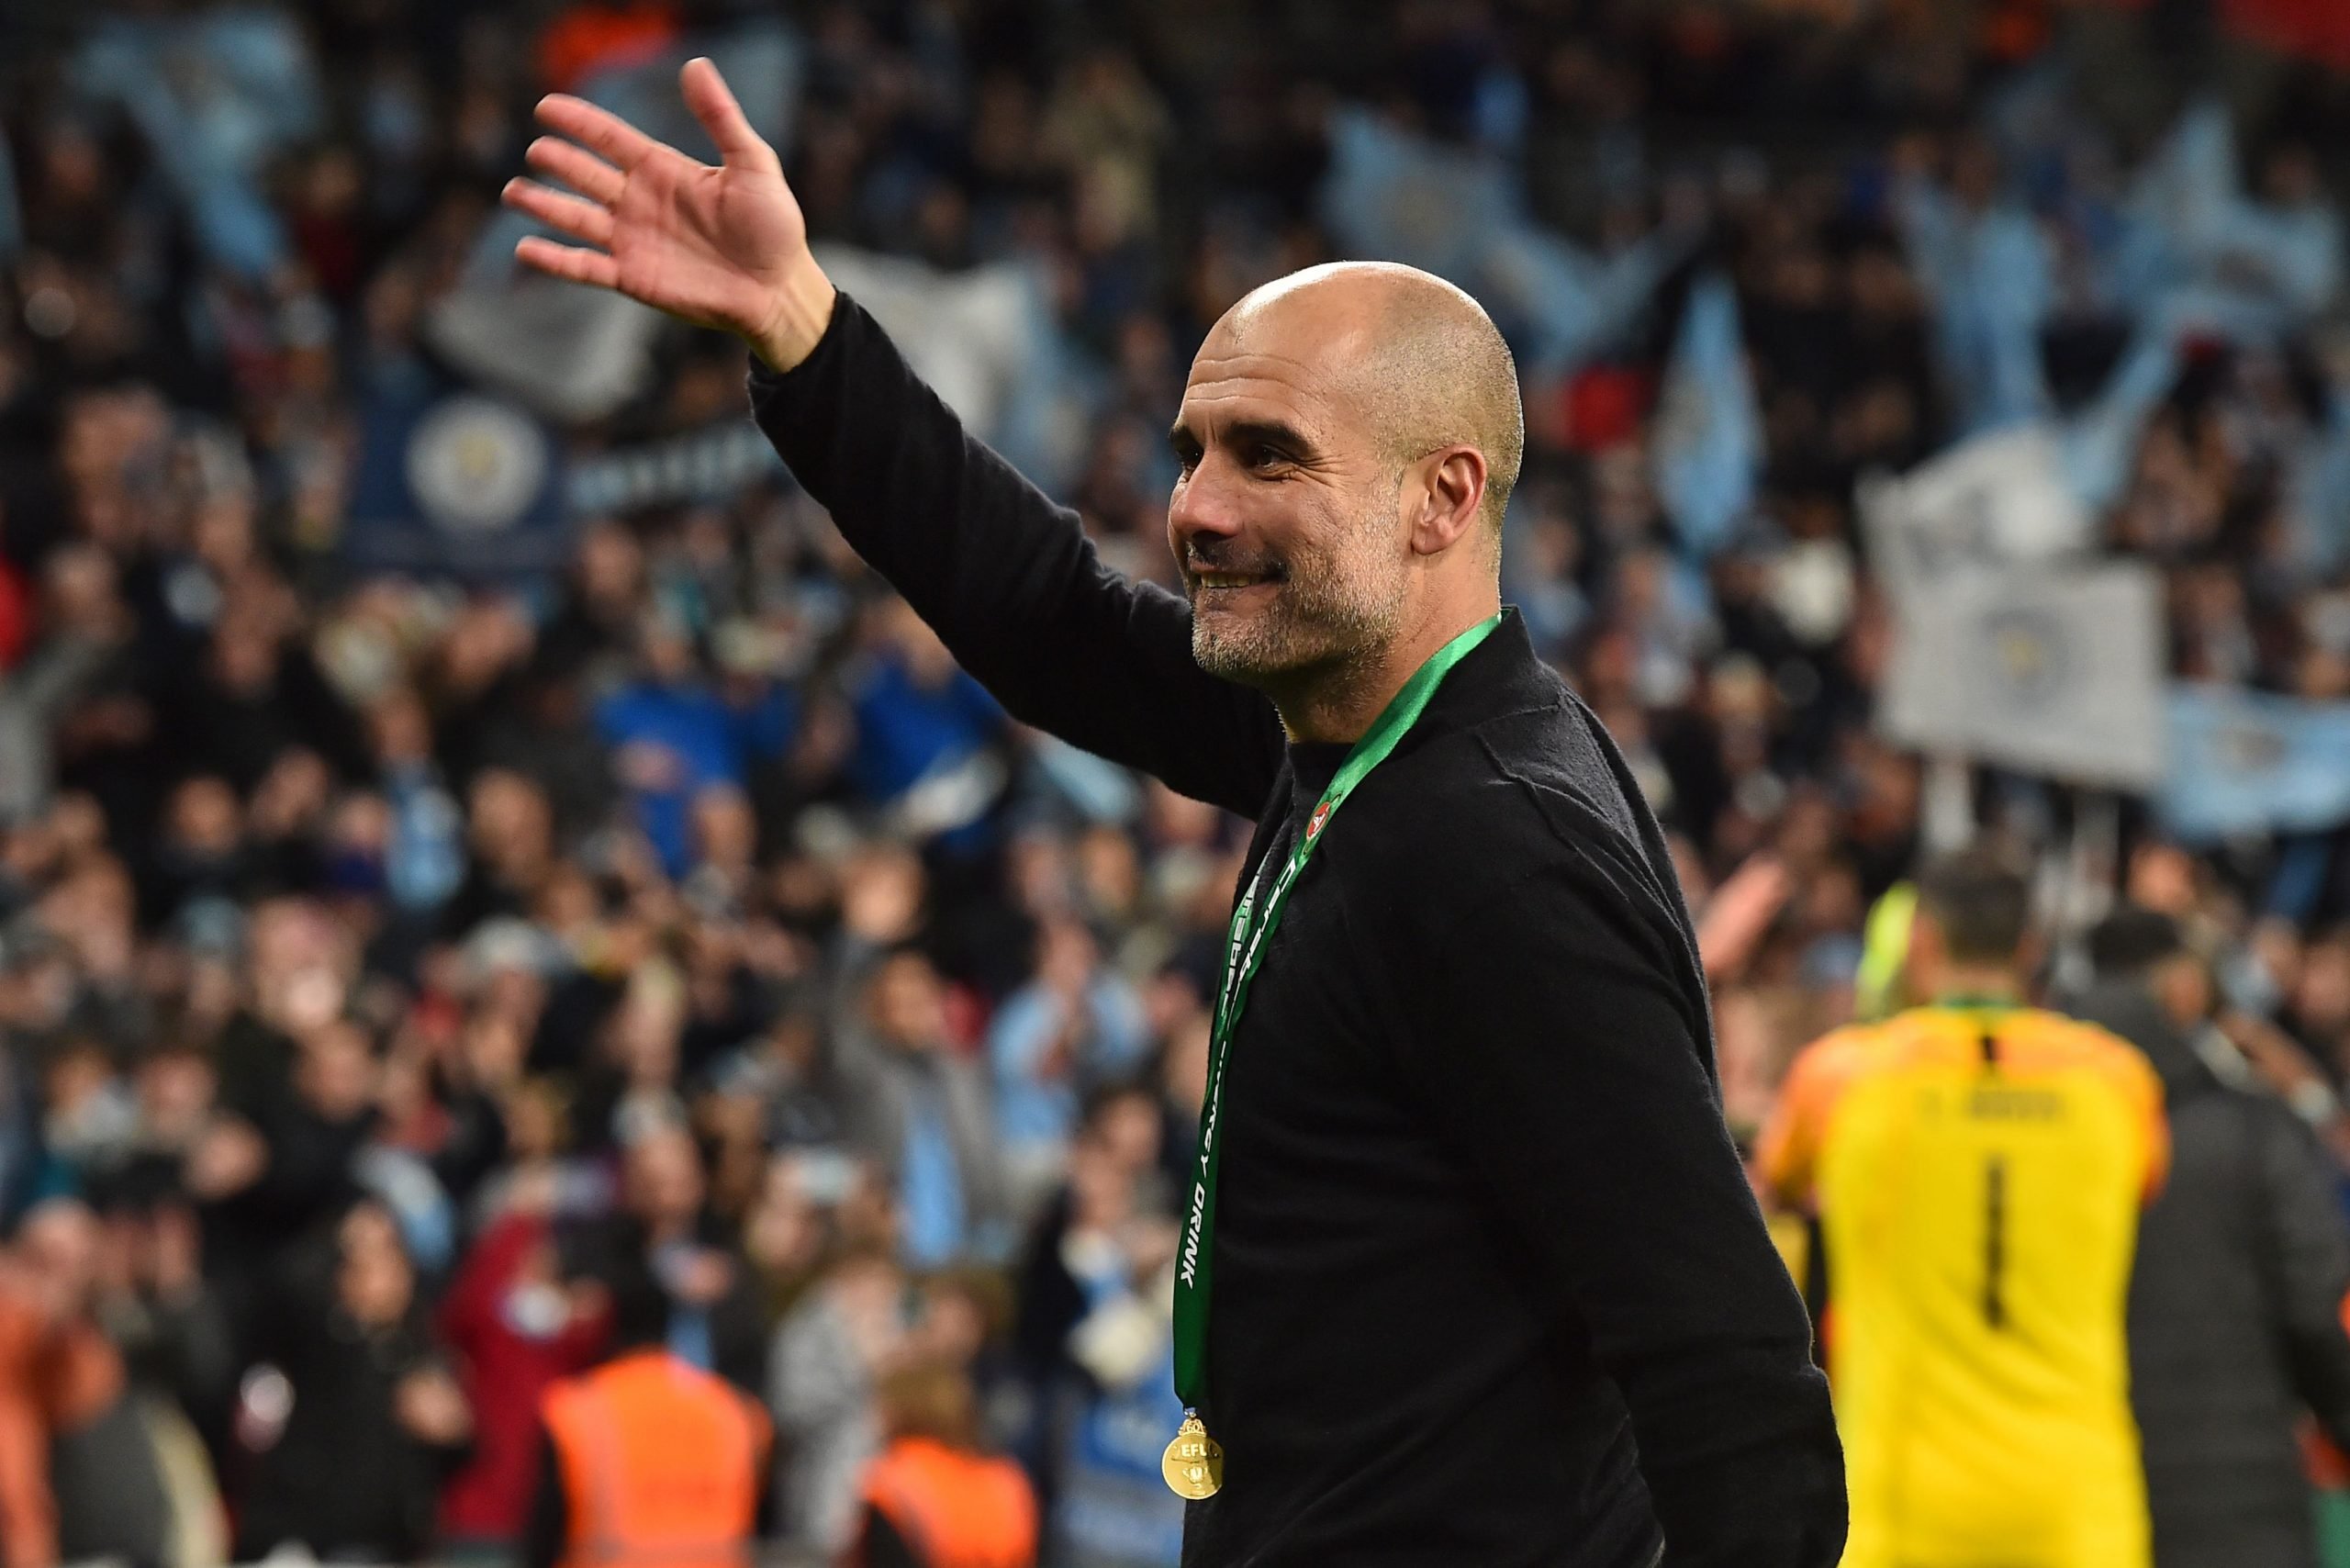 Manchester City's Spanish manager Pep Guardiola celebrates on the pitch after the English League Cup final football match between Aston Villa and Manchester City at Wembley stadium in London on March 1, 2020. - Manchester City won the game 2-1. (Photo by GLYN KIRK/AFP via Getty Images)